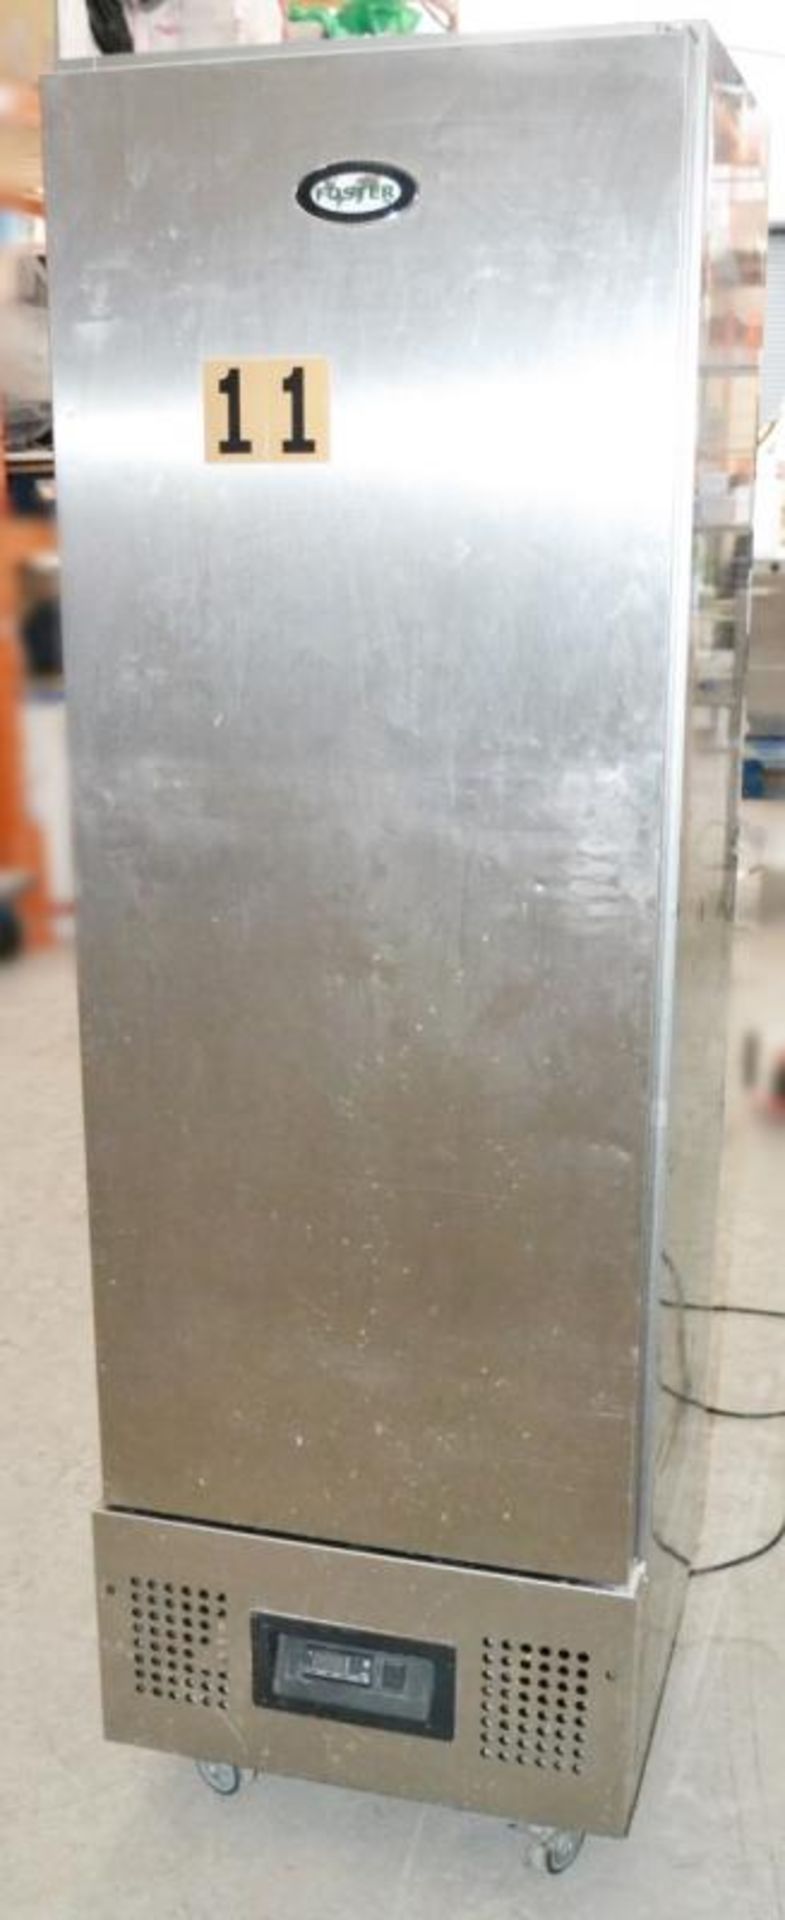 1 x FOSTER FSL400H Upright Slimline Commercial Refrigerator - Stainless Steel - Dimensions: W60 x D6 - Image 3 of 9